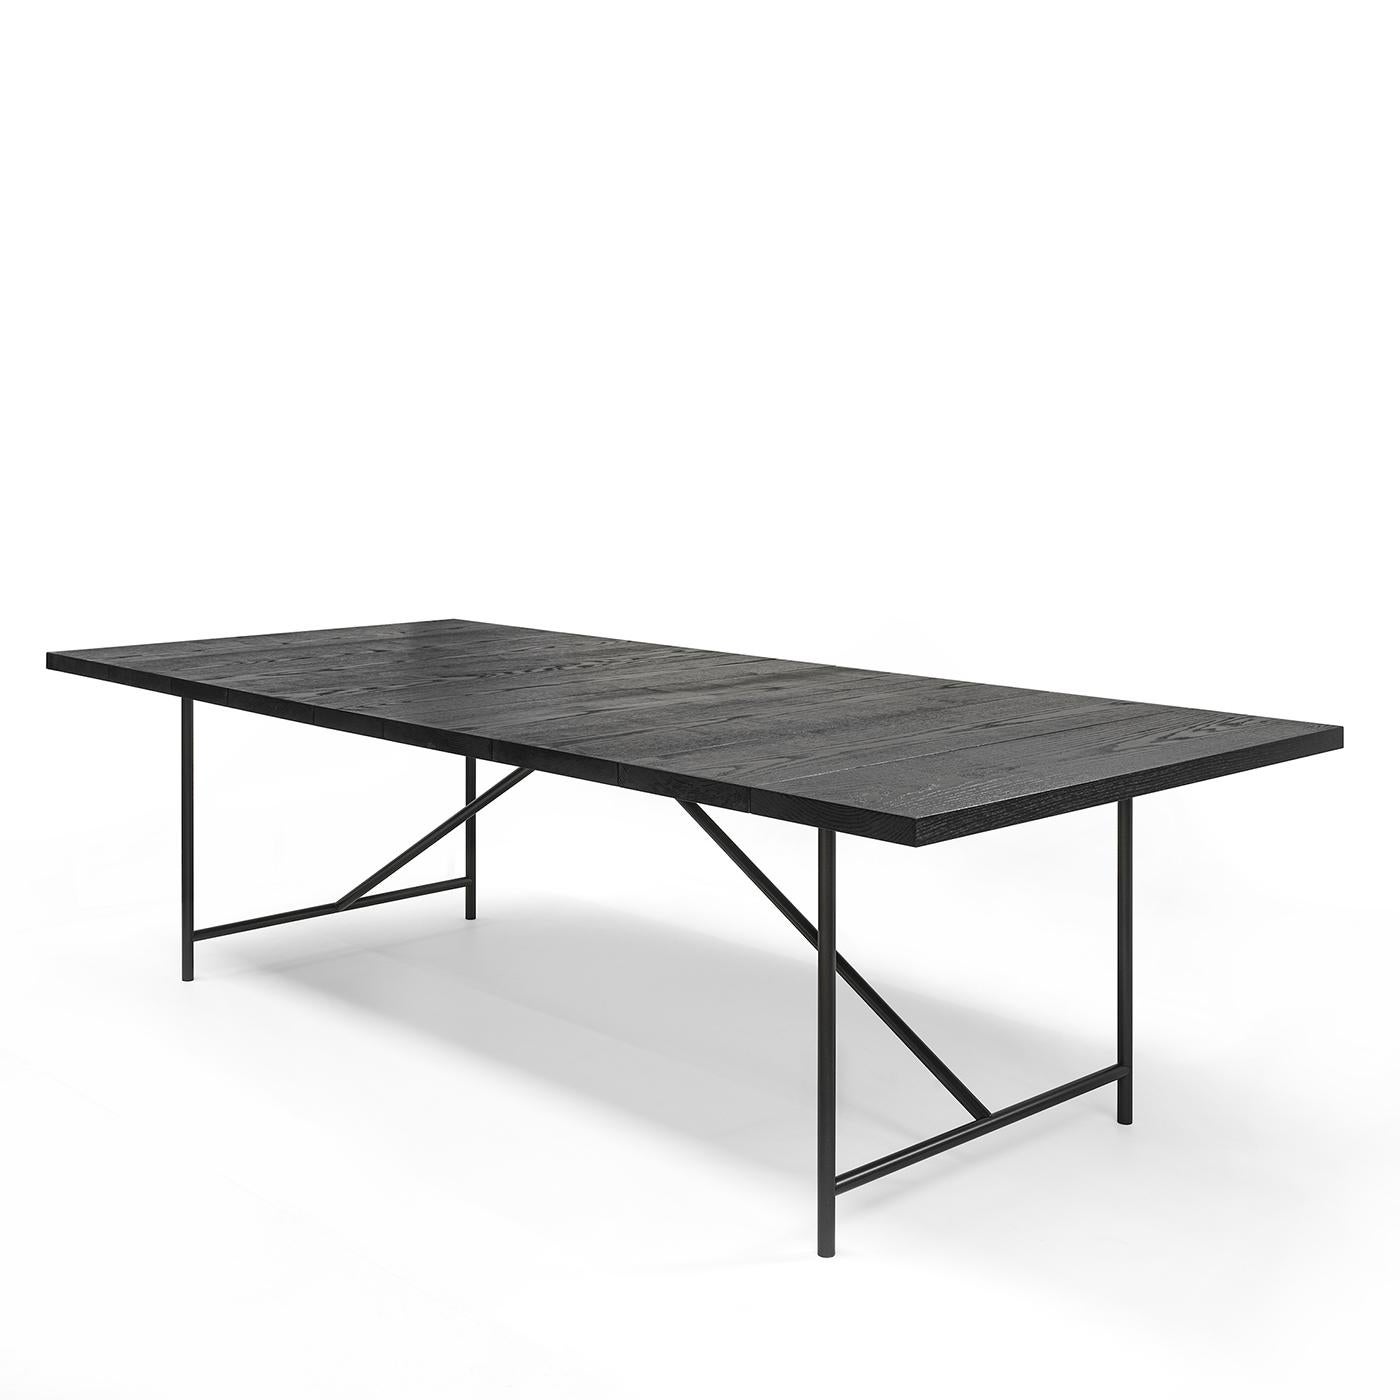 Table Studio Oak black with table top in solid oak wood
in black pigmented finish. Top made of asymetric oak wood
slats with small gaps between the slats. Table with trestle base
made with tubular iron in lacquered finish.
Also available with